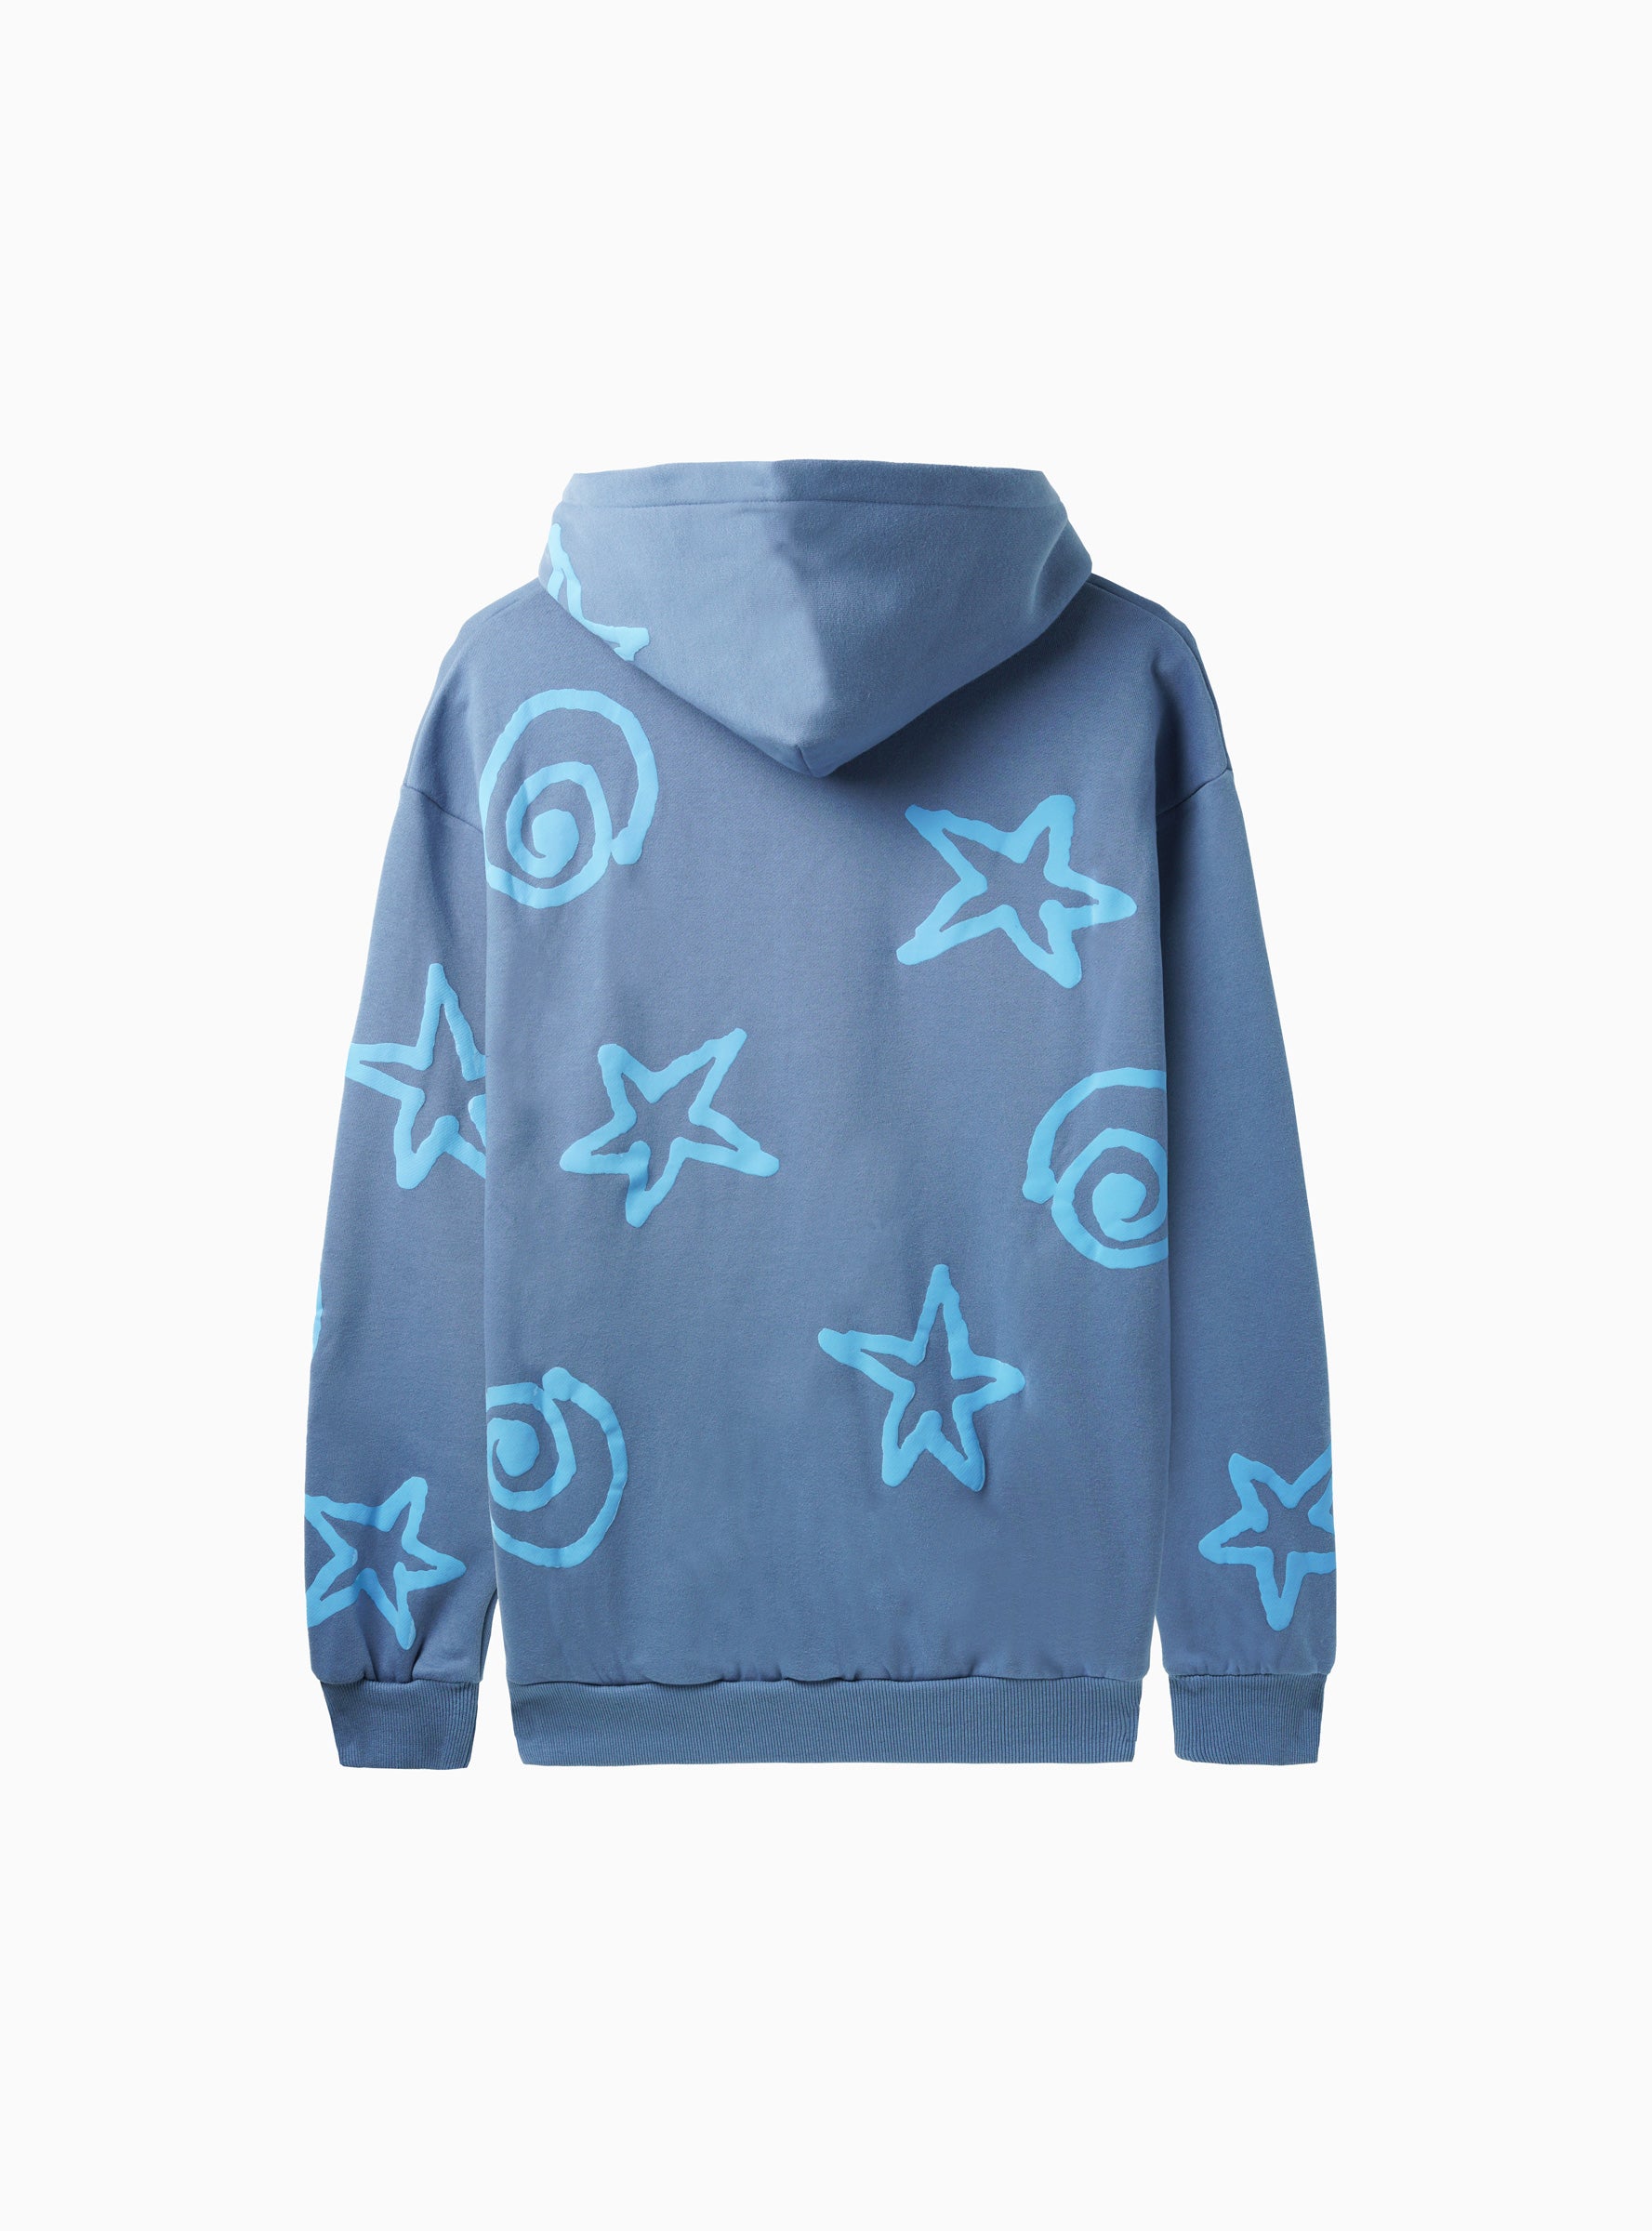 All Over Shapes Hoodie Denim Blue by Lo-Fi